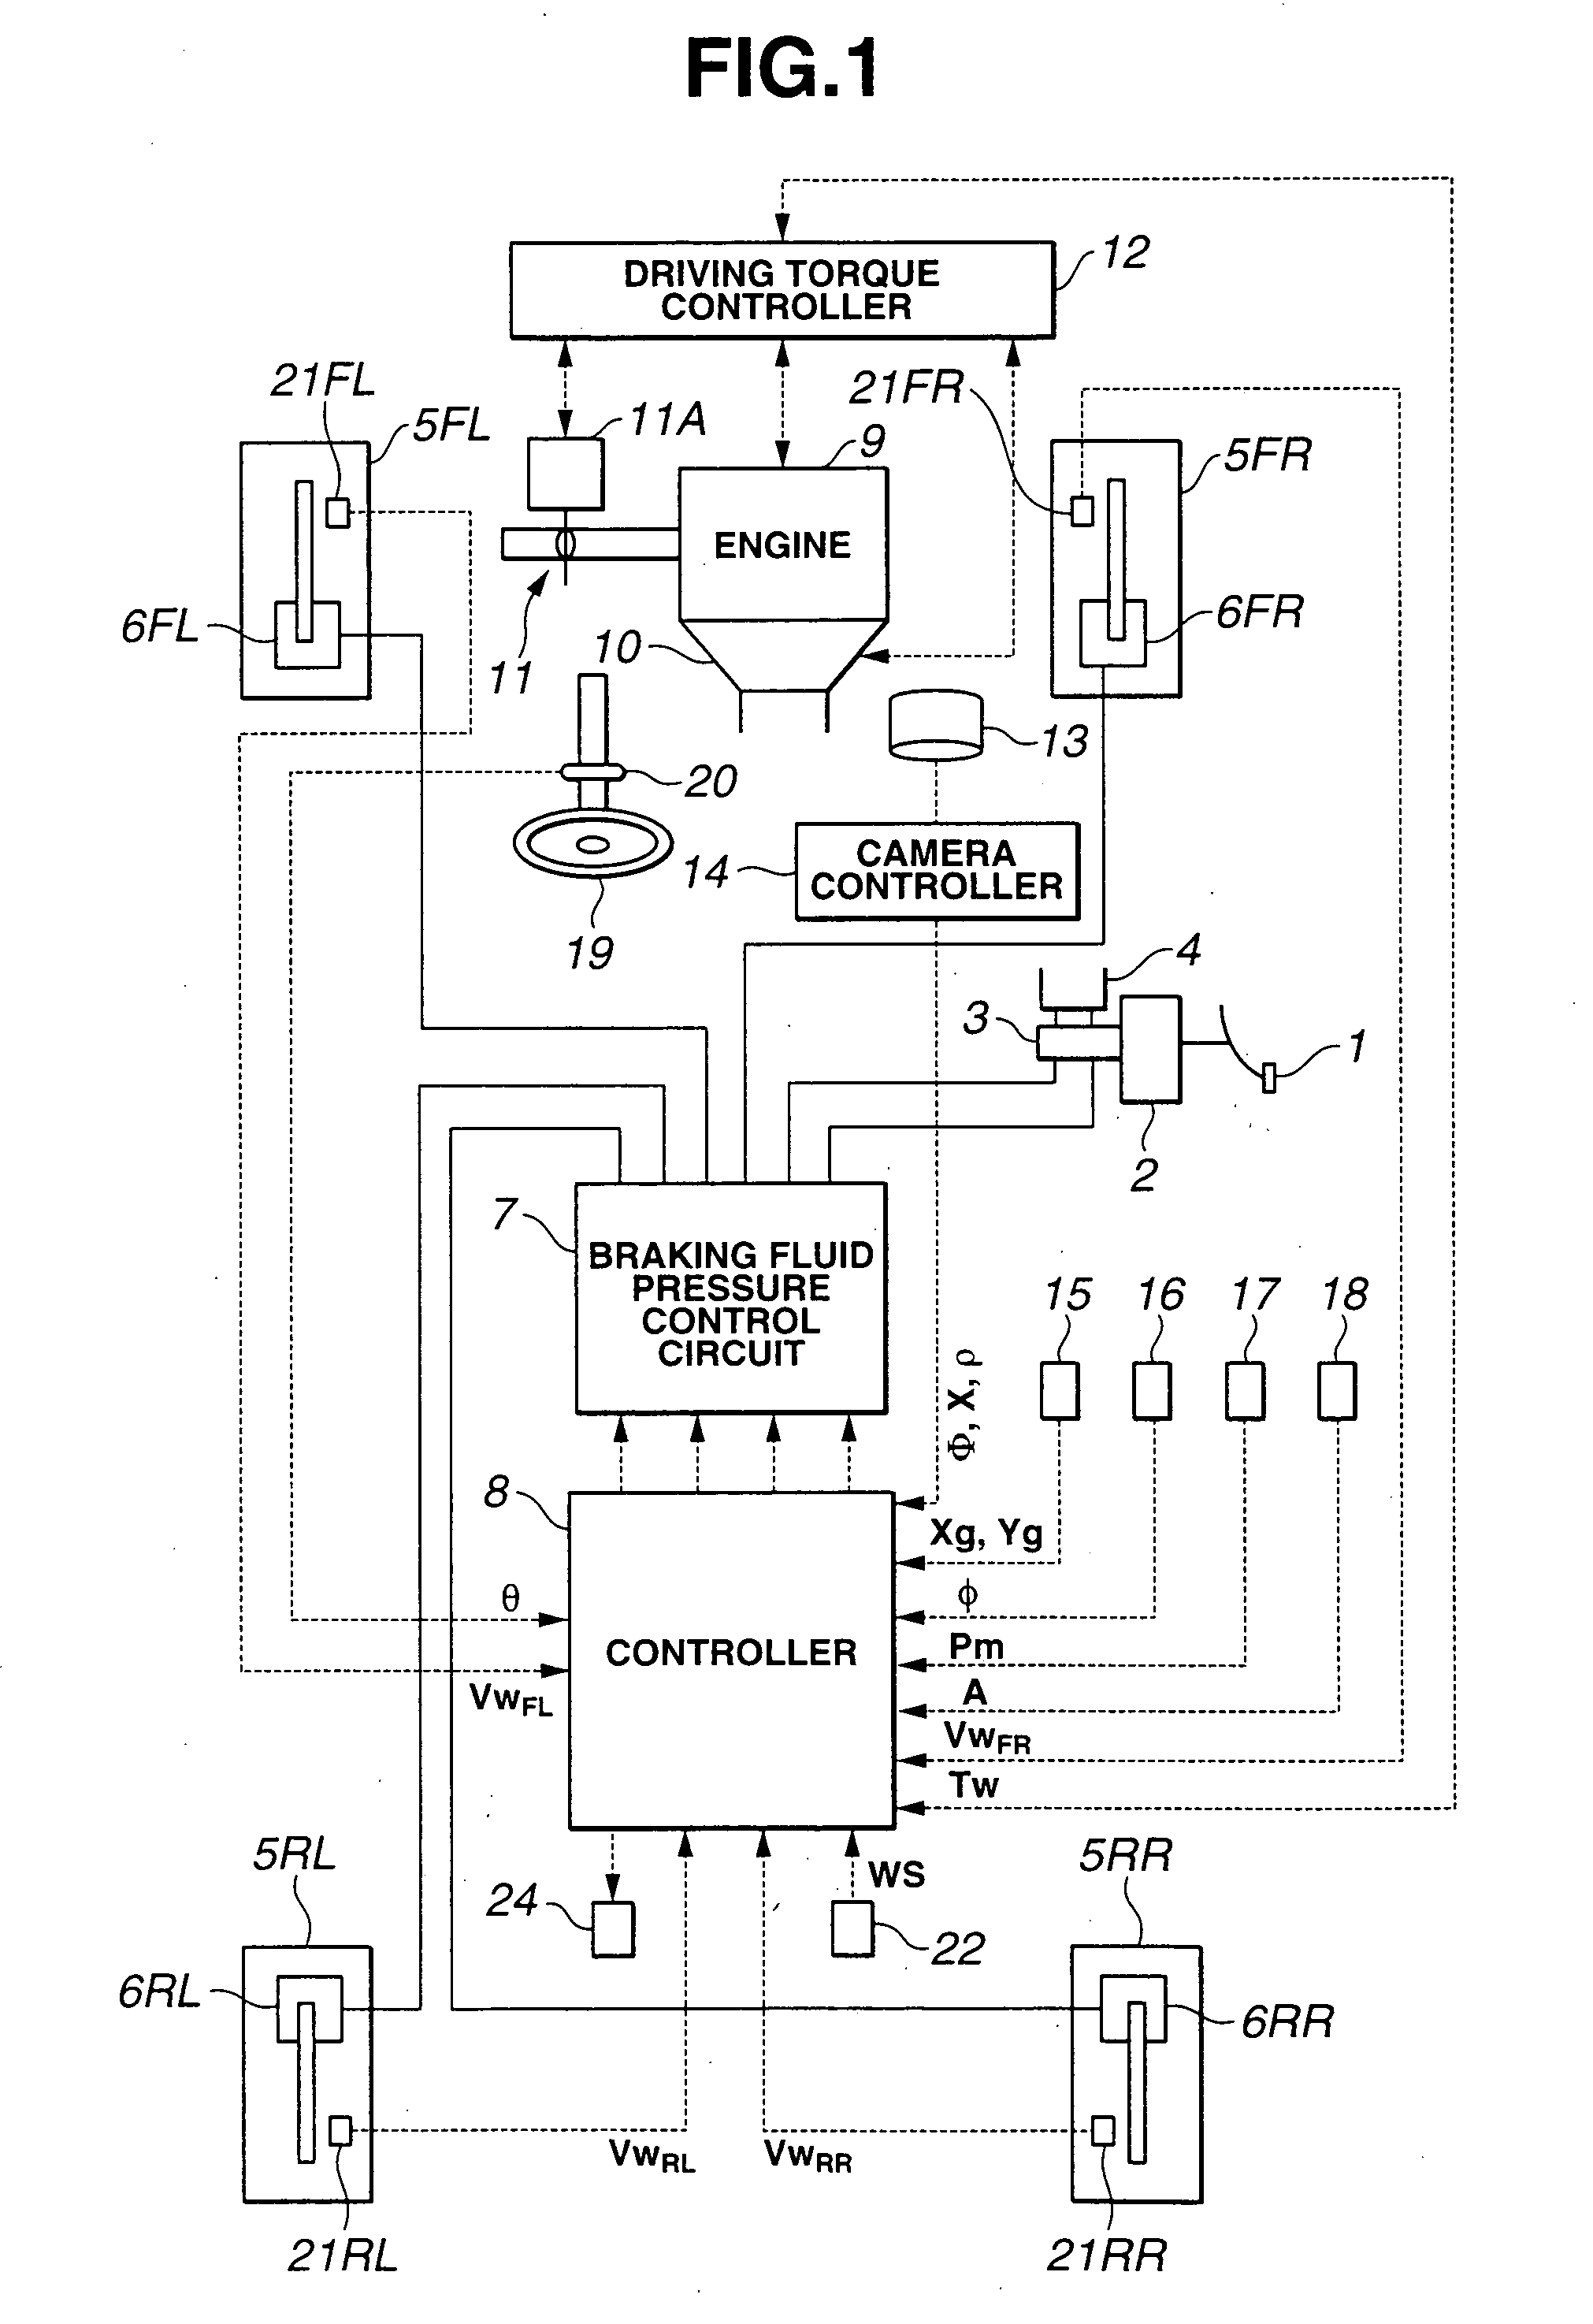 Lane keep control apparatus and method for automotive vehicle